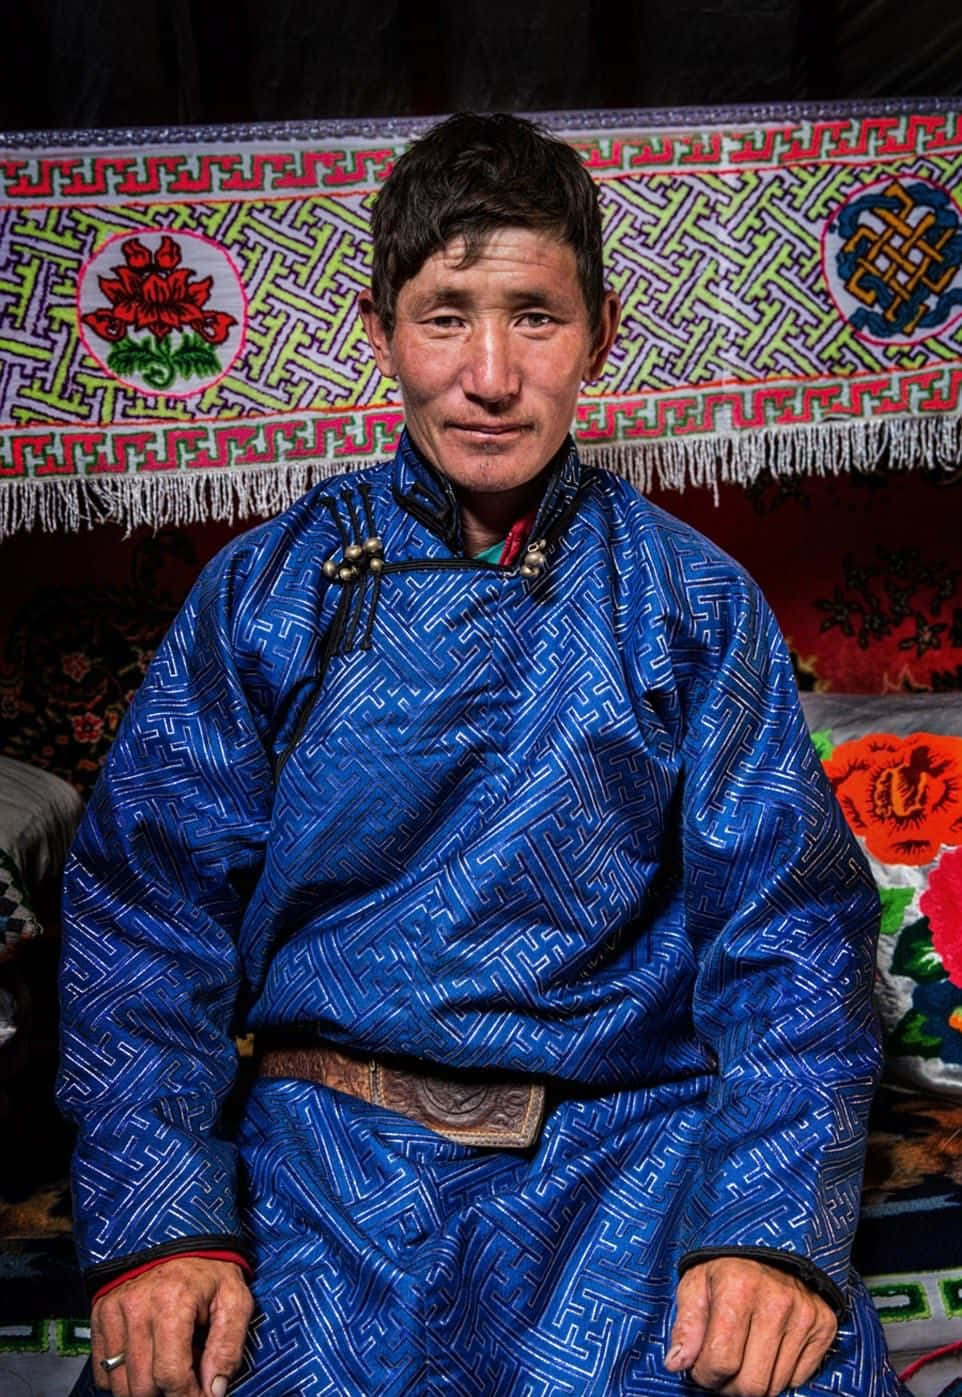 A Man In Traditional Clothing Sitting On A Rug